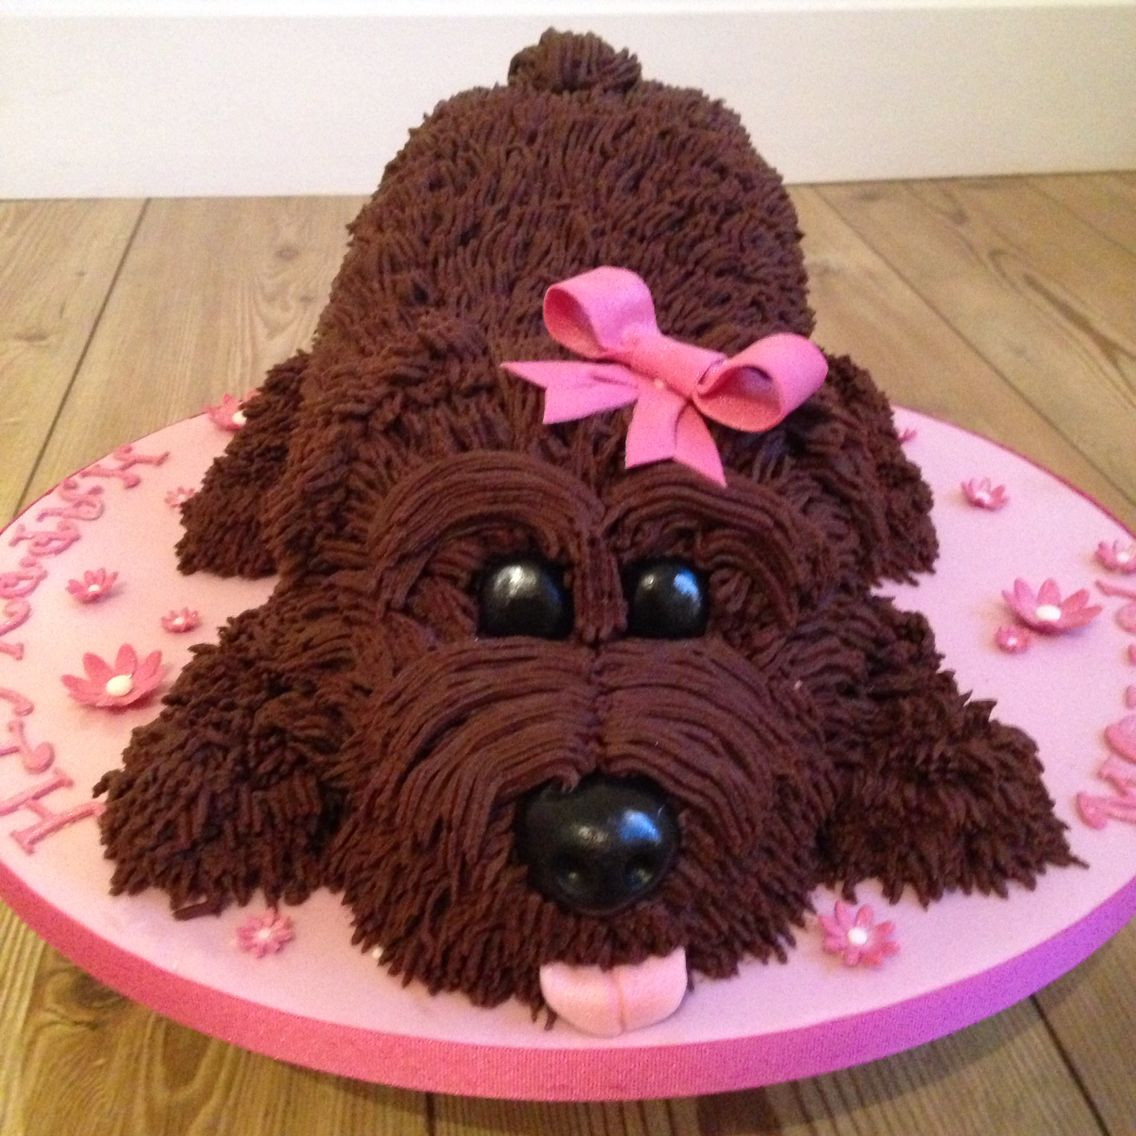 How To Make A Birthday Cake For A Dog
 Chocolate dog shape cake … in 2019